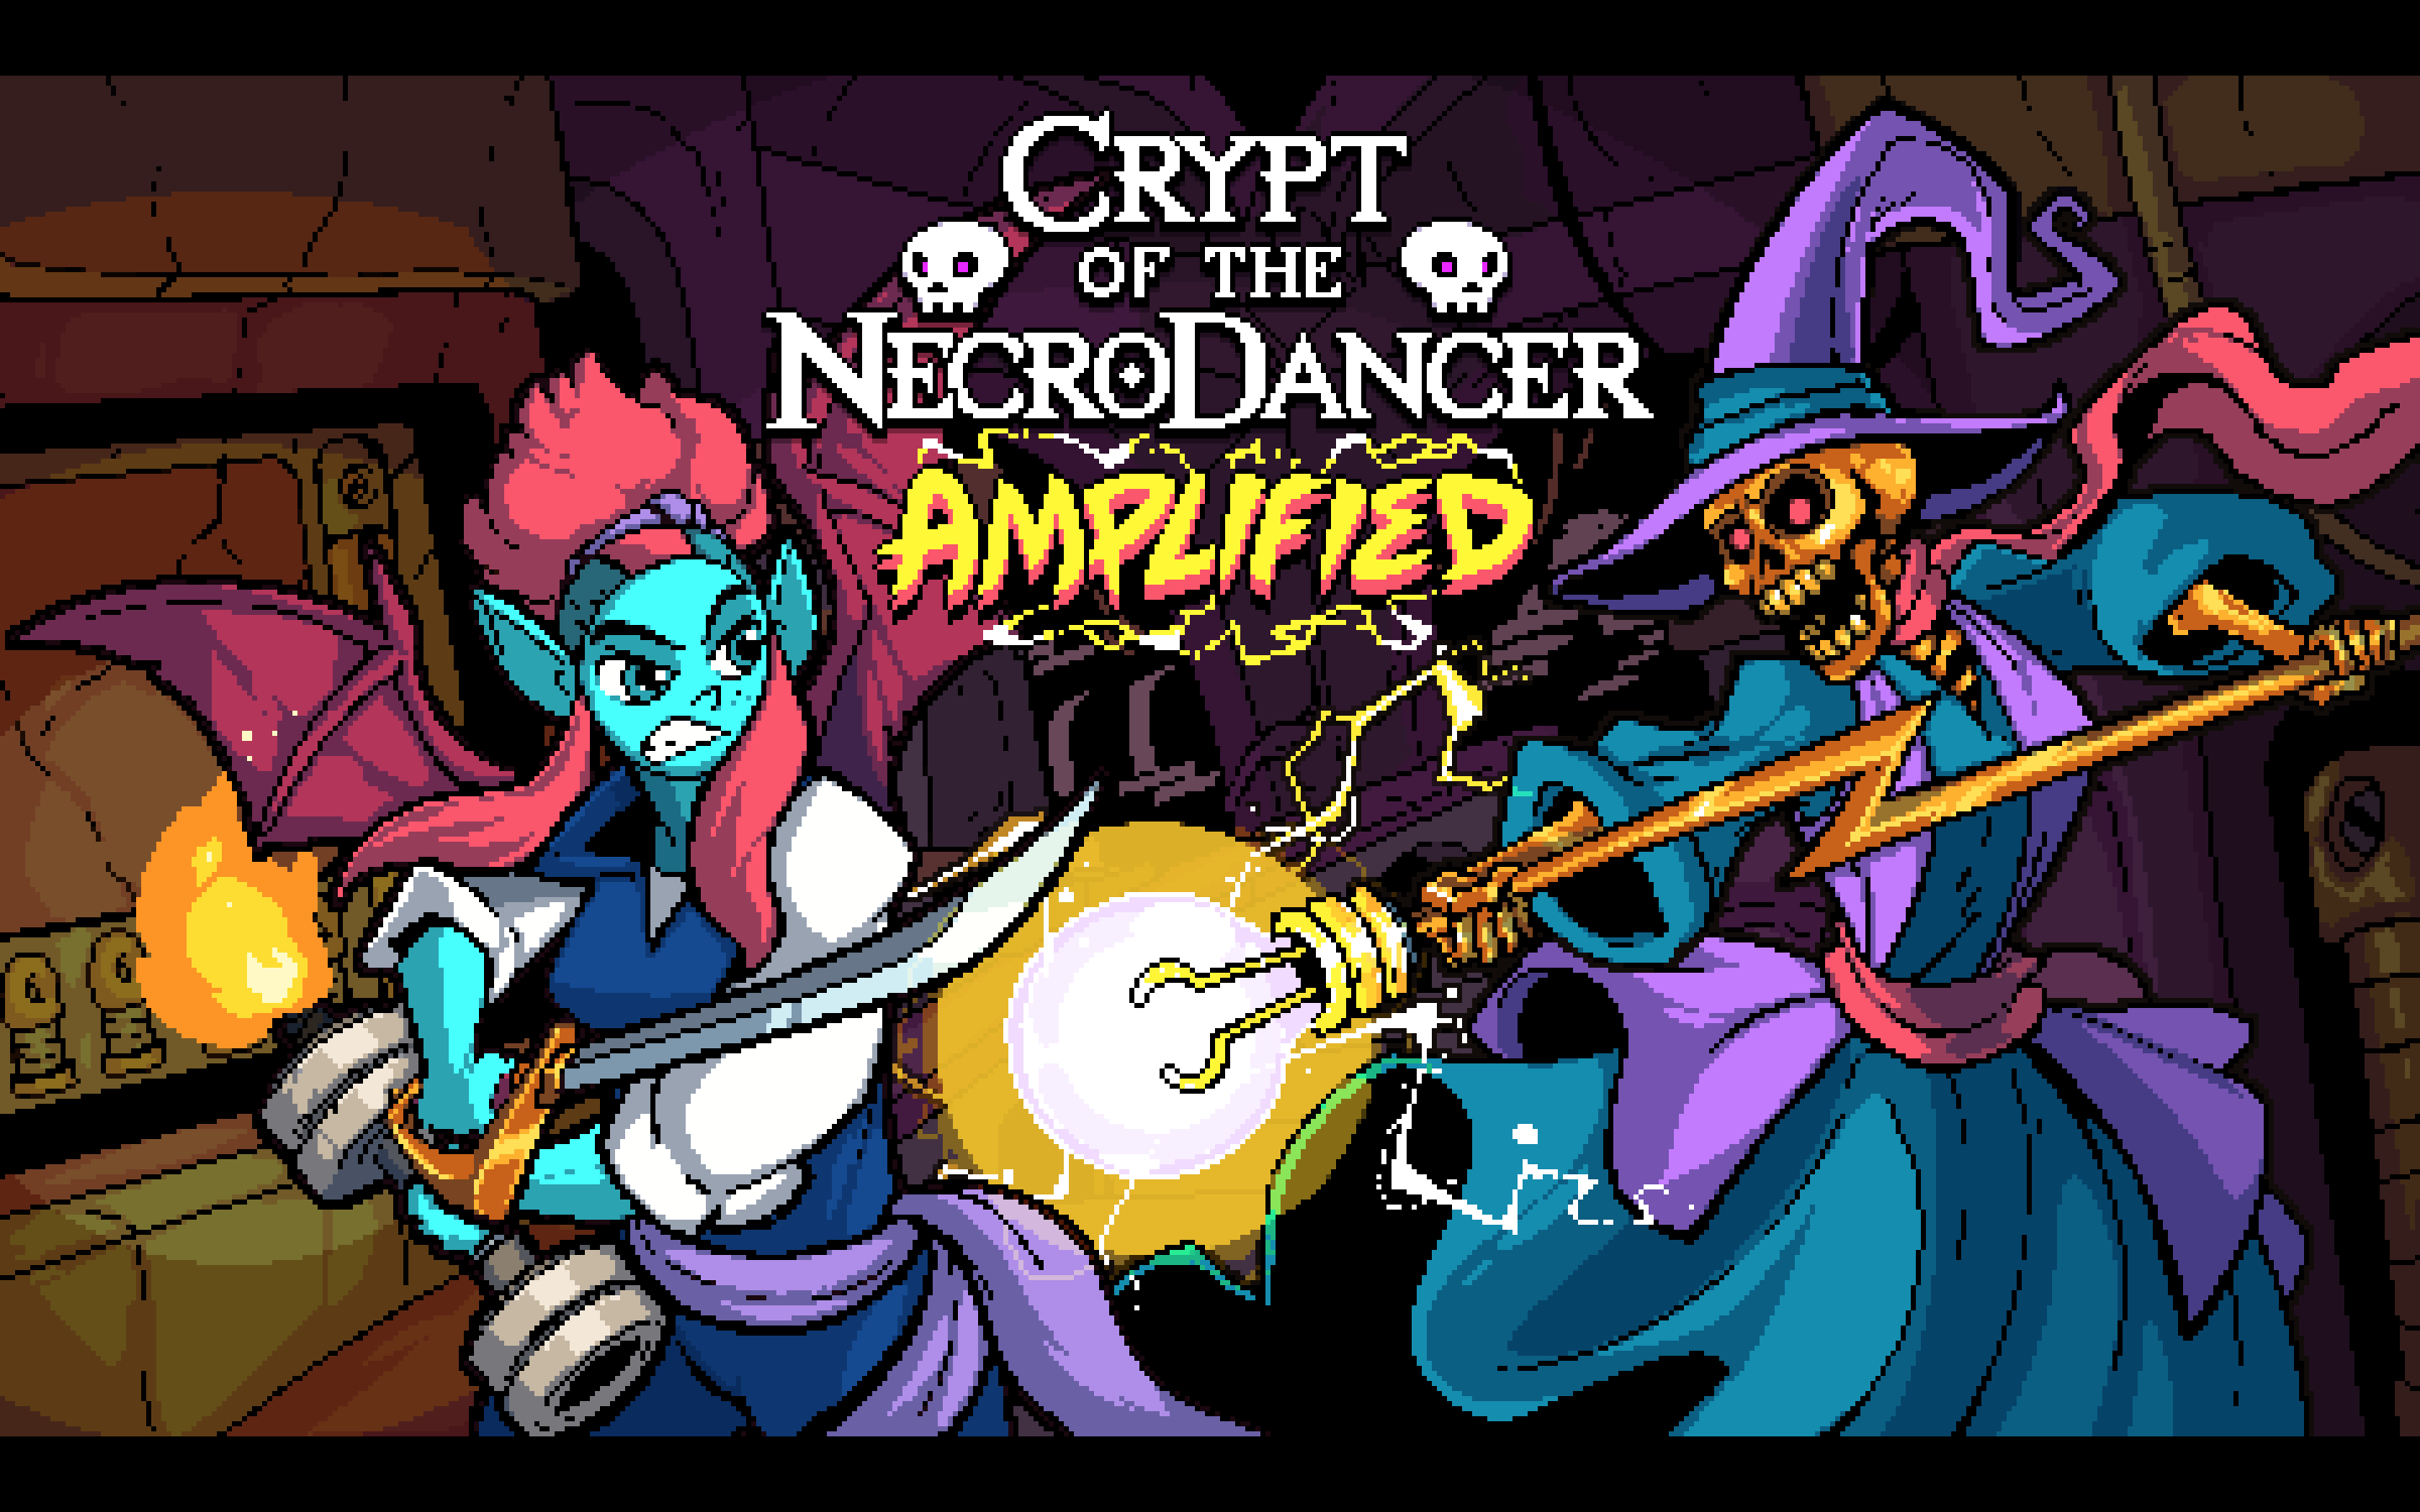 “Crypt of the NecroDancer” DLC Now In Early Access - “Amplified” Now Ready For Your Feedback